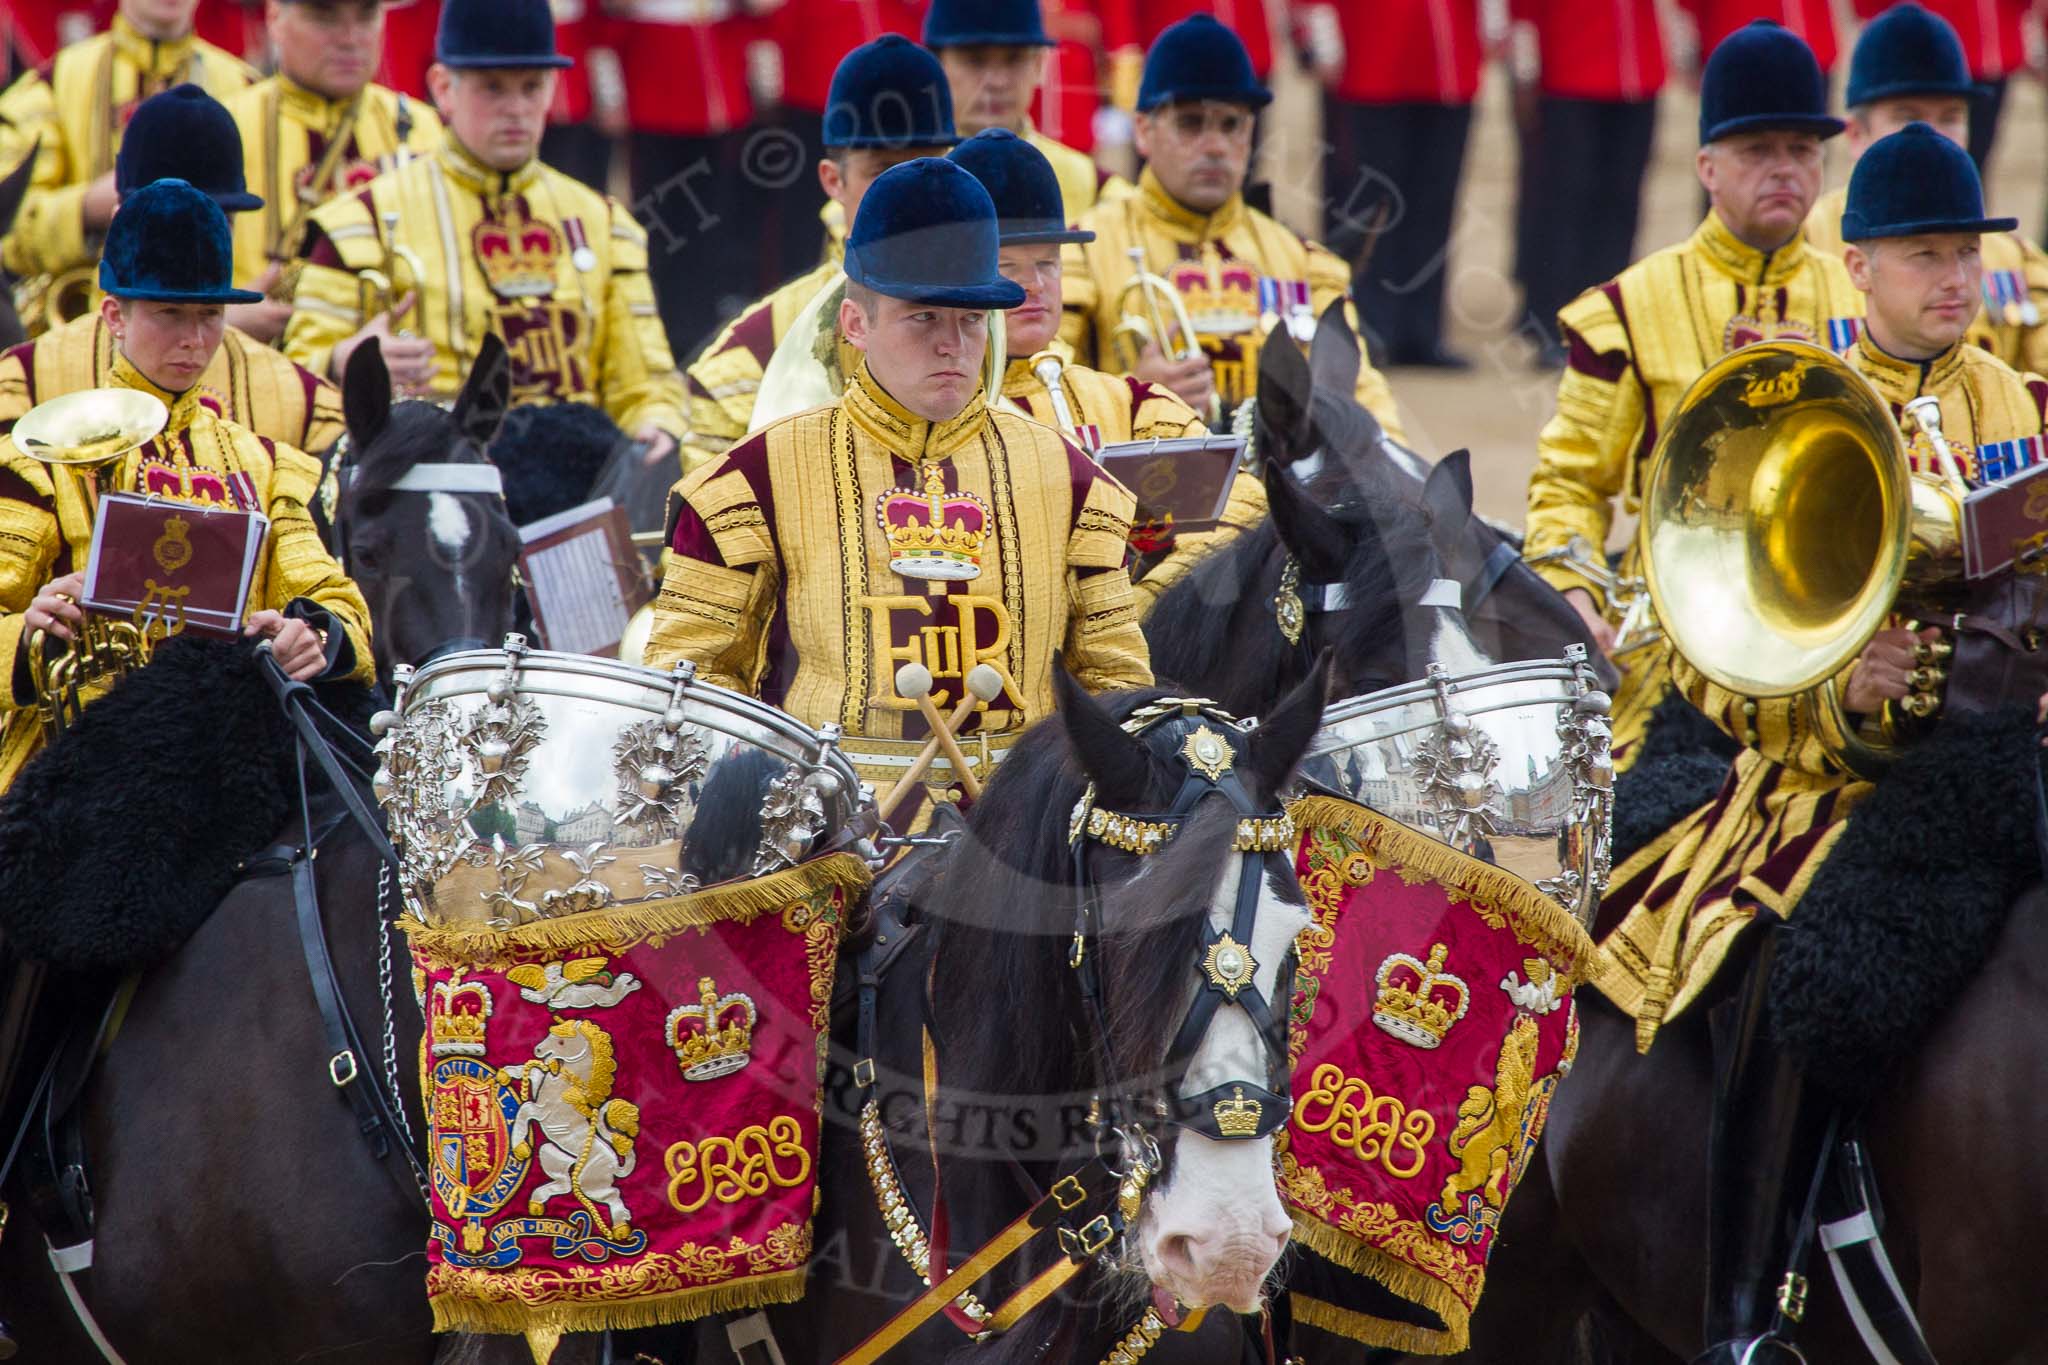 Trooping the Colour 2014.
Horse Guards Parade, Westminster,
London SW1A,

United Kingdom,
on 14 June 2014 at 12:02, image #835